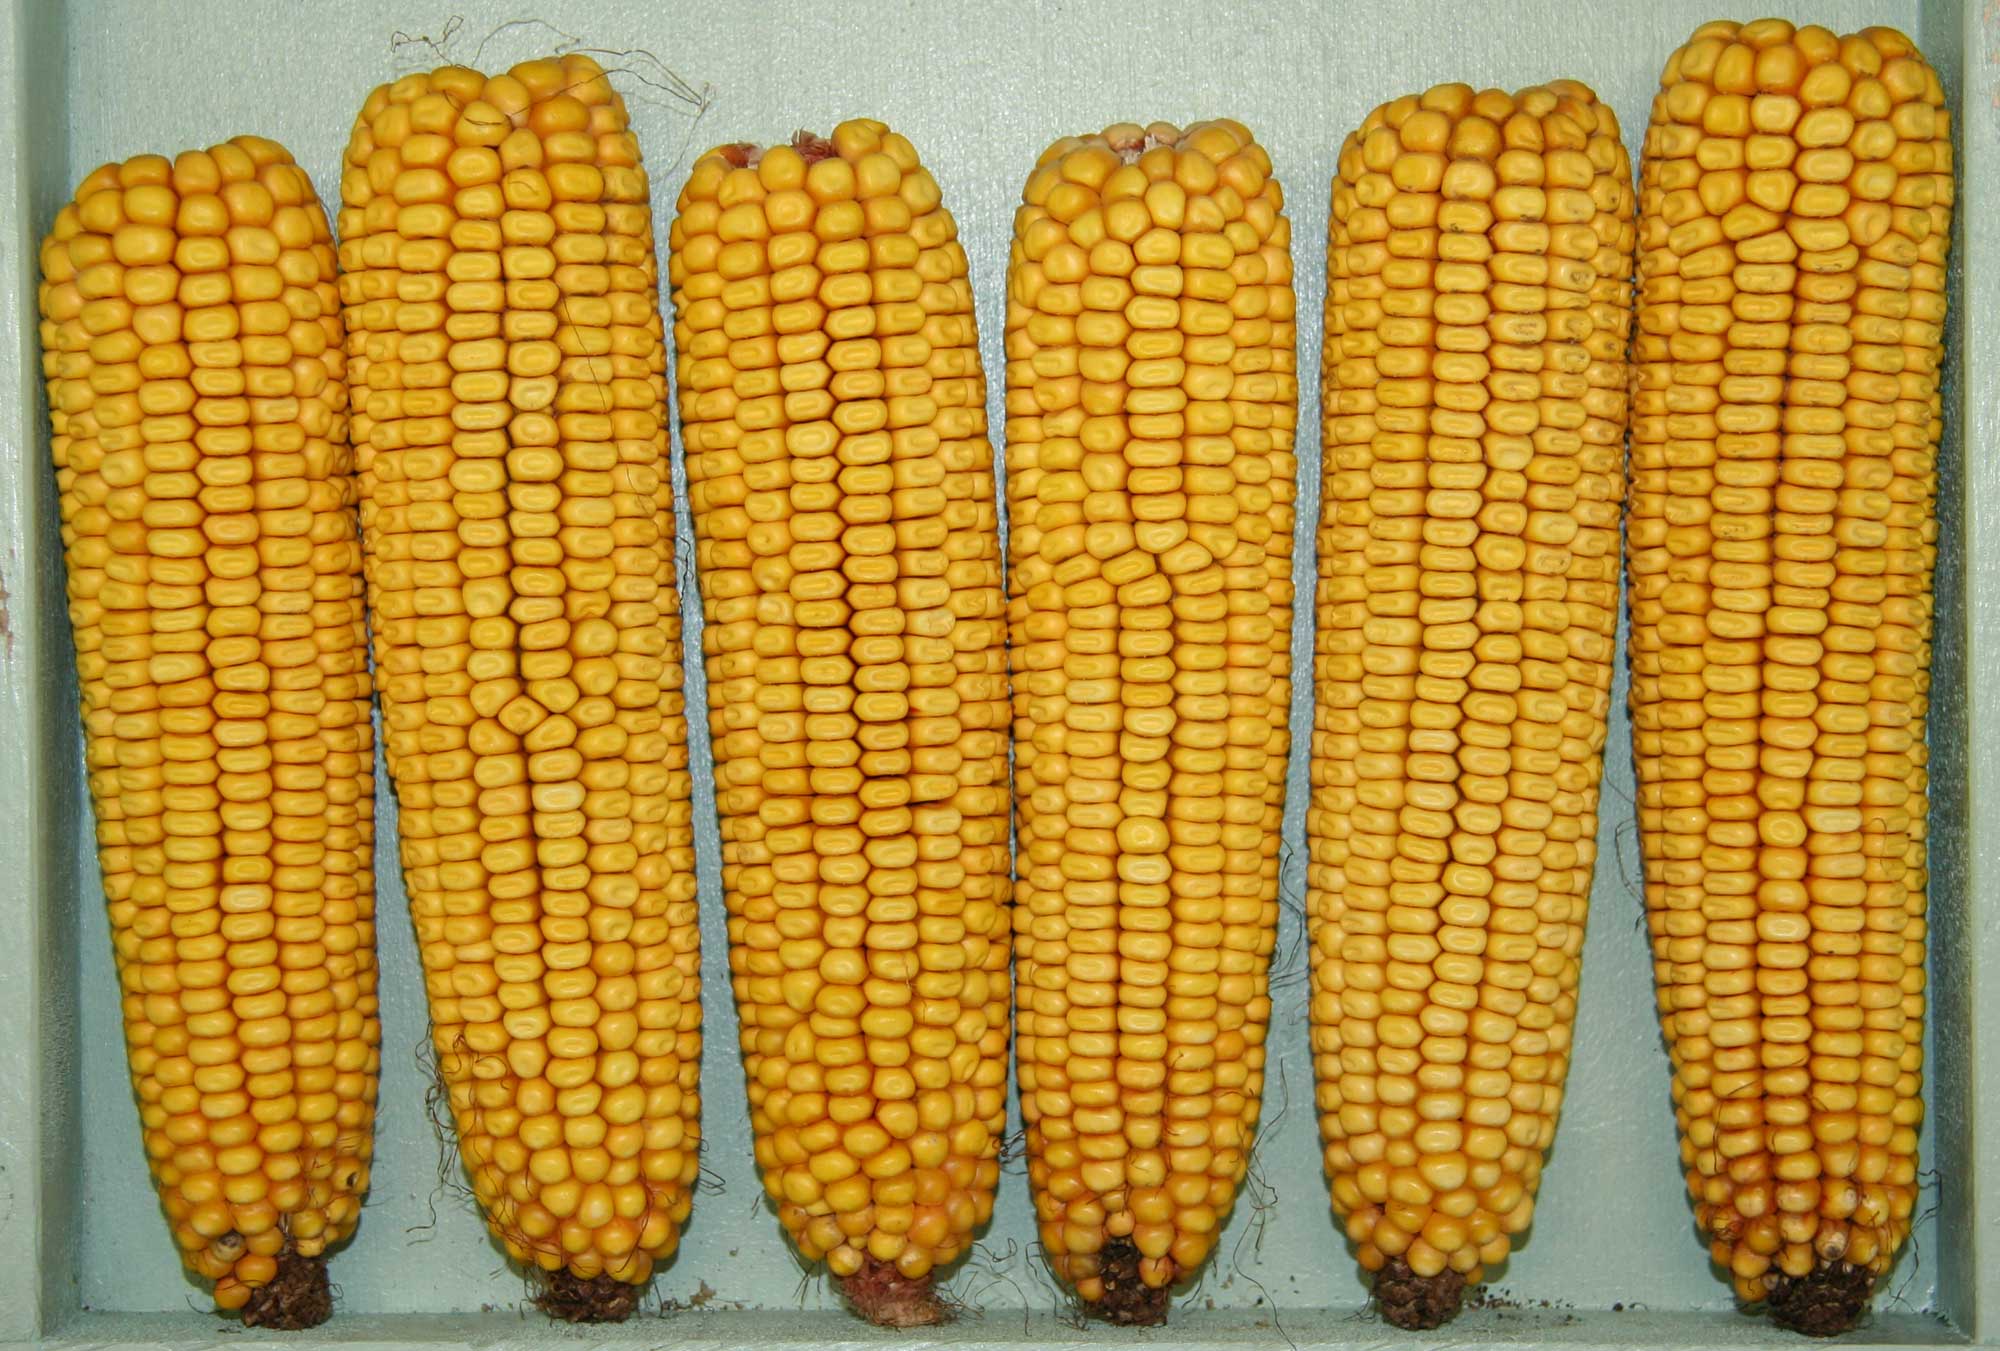 Photograph of ears of yellow dent corn. The photograph shows six ears of yellow dent corn lined up in a row, with their tips towards the base of the image. The kernels of the ears are yellow, the a dent in the tip of each kernel.